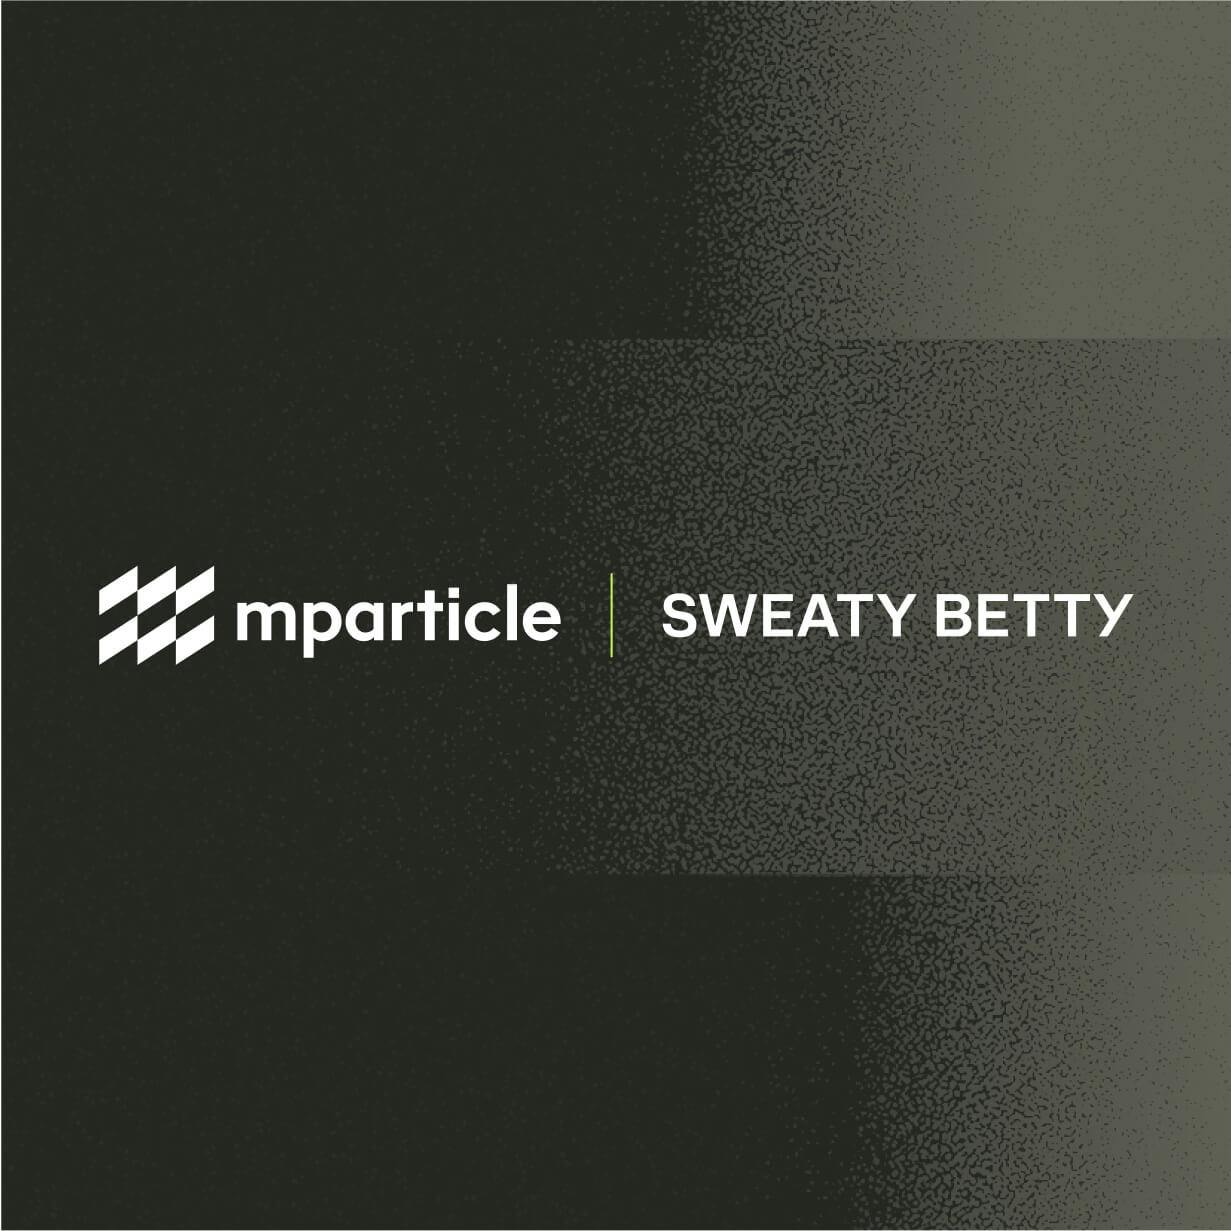 Sweaty Betty partners with mParticle to future-proof their technology architecture